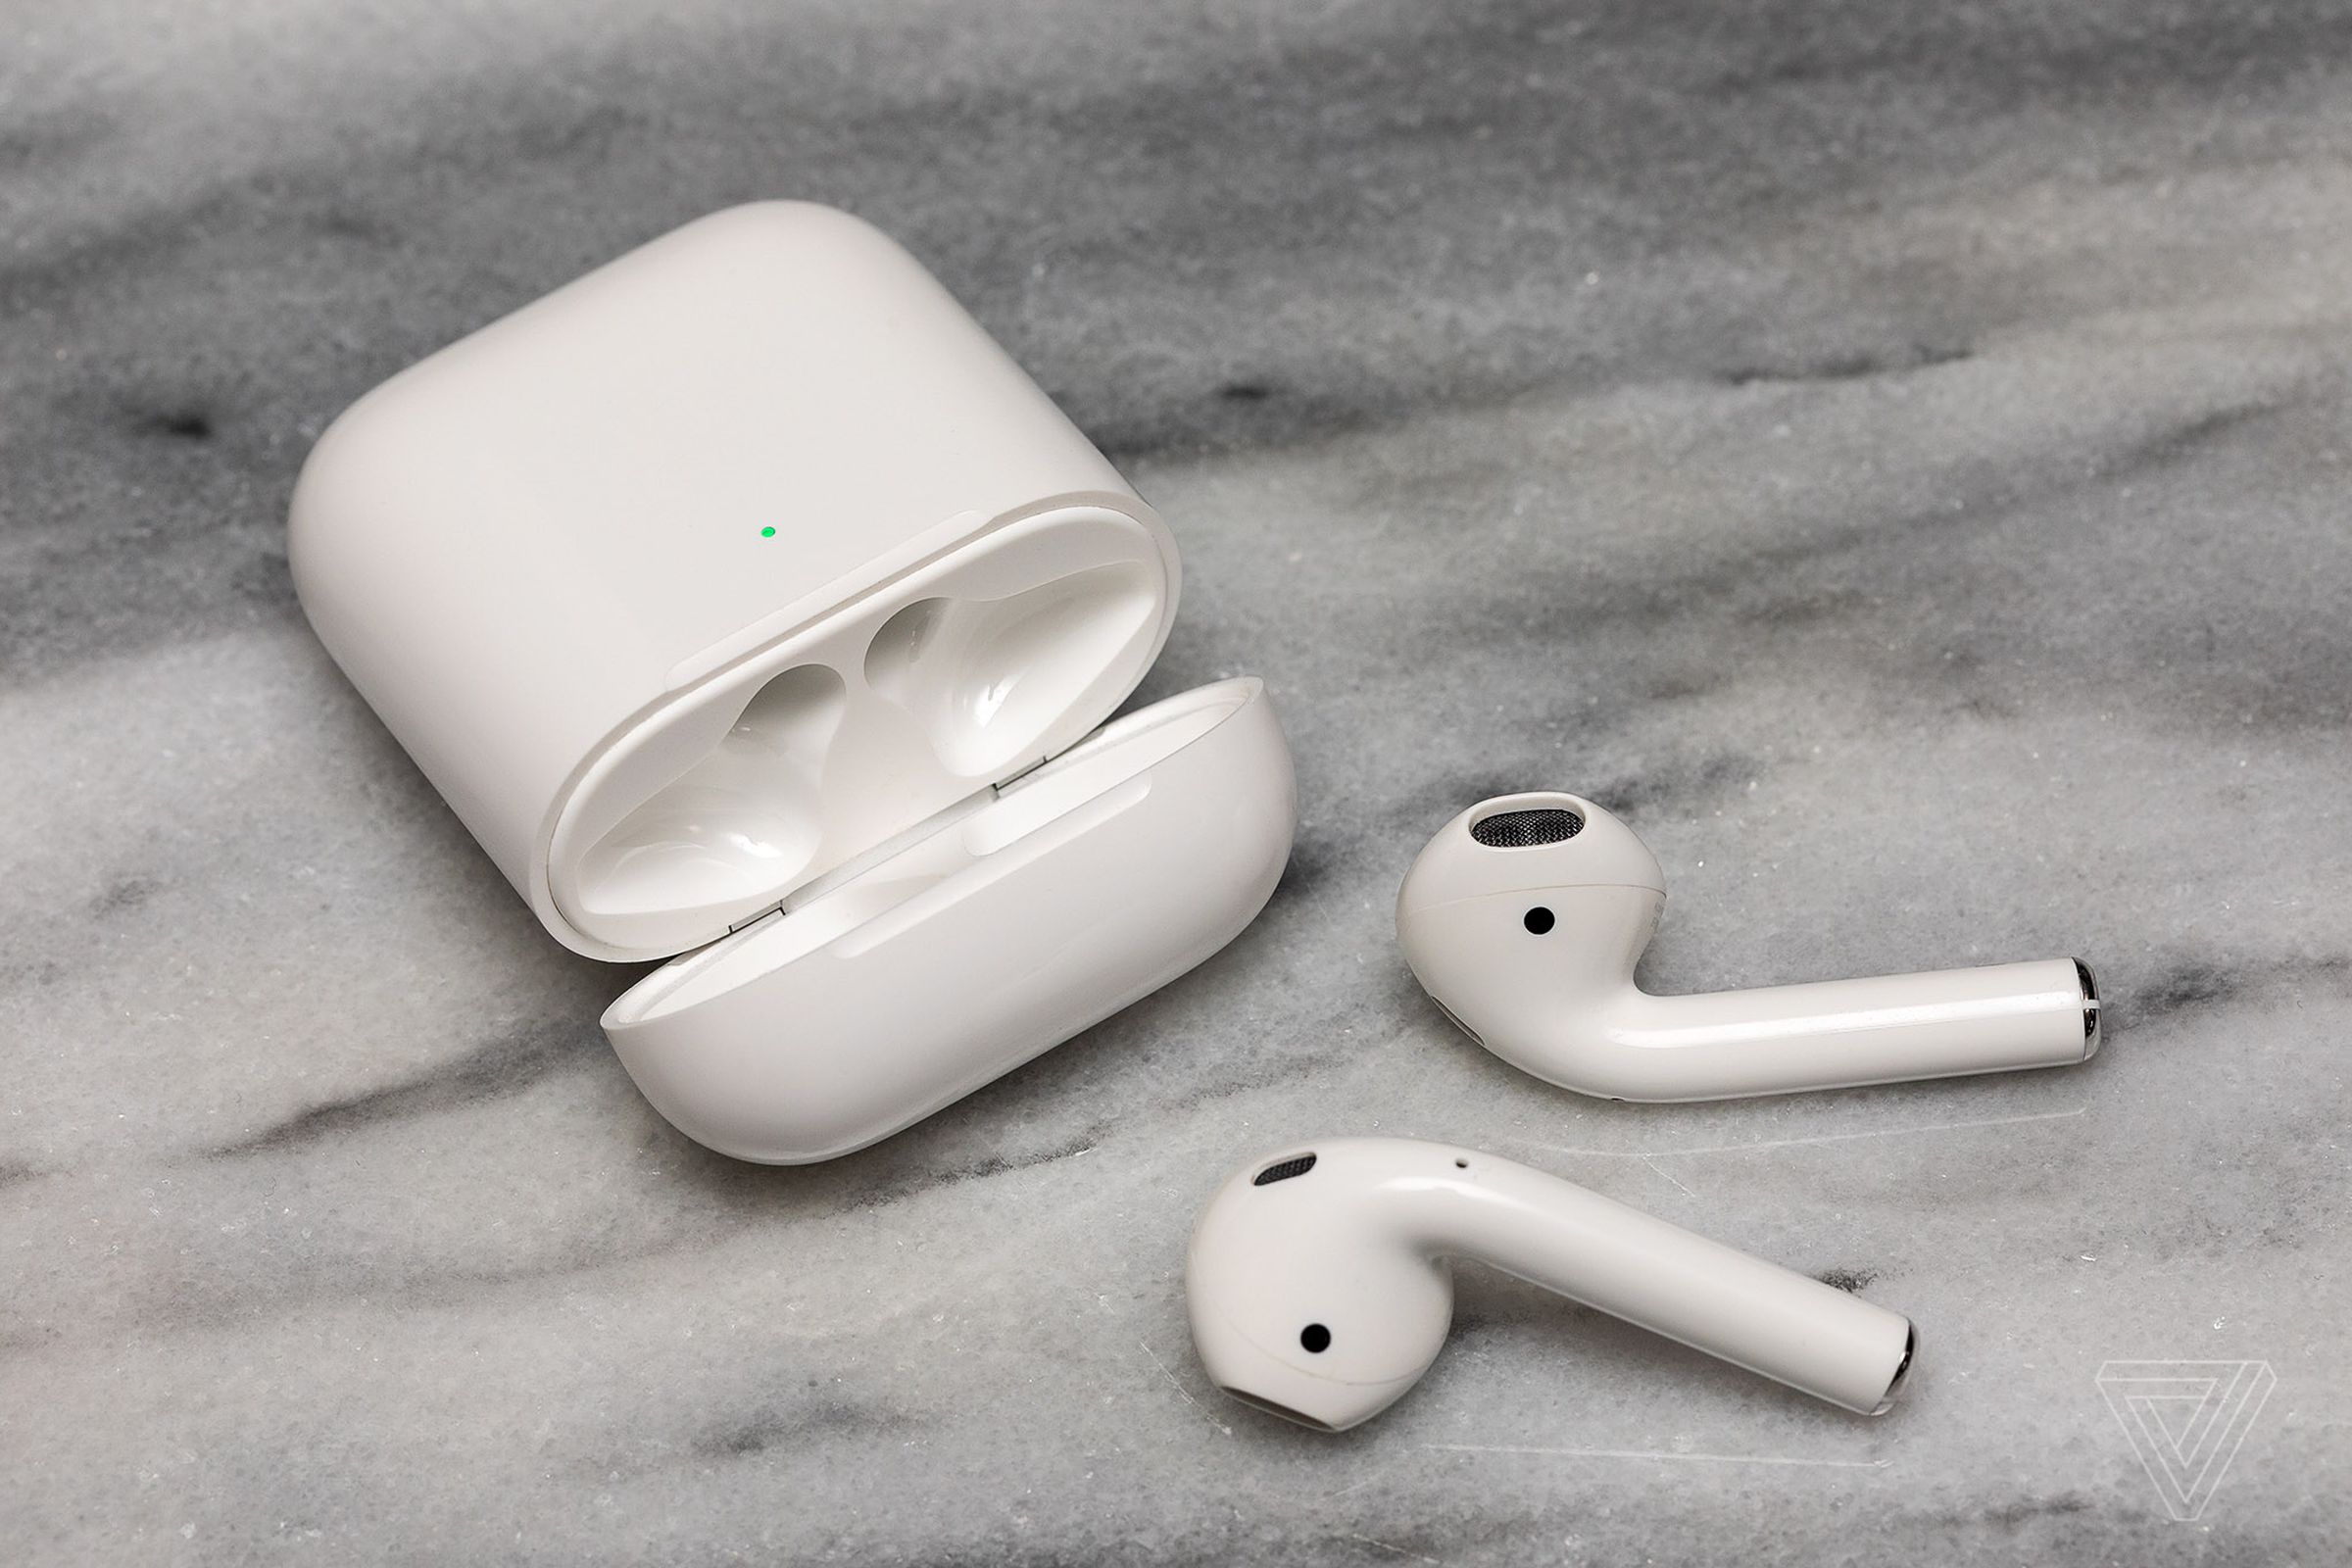 Apple’s second-gen AirPods are just $89.99 right now at Amazon.